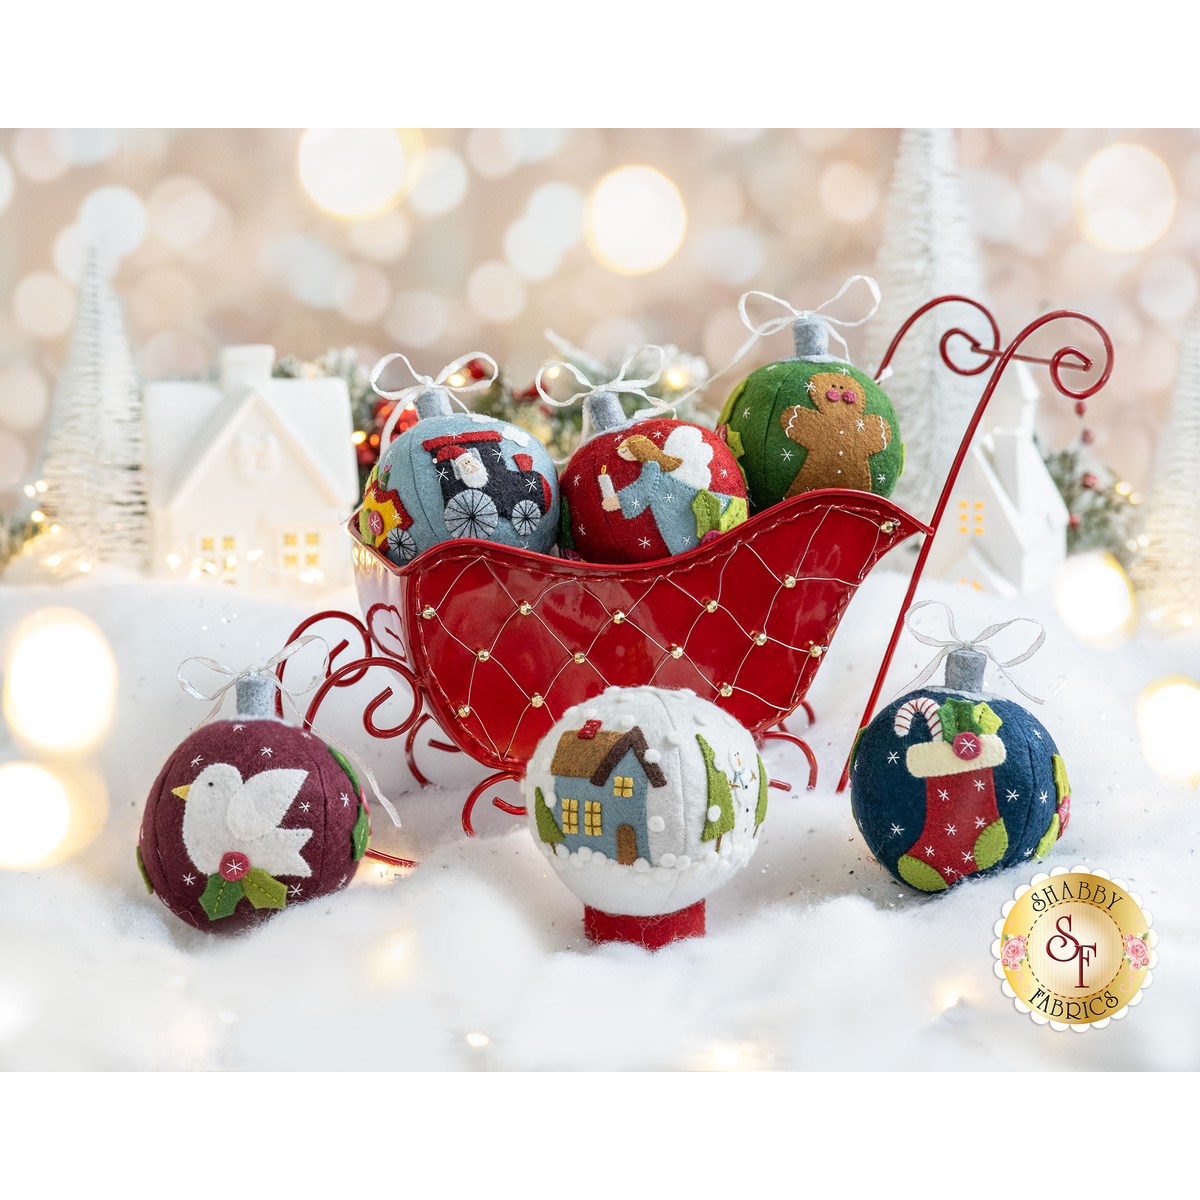 Fabric Snowman Christmas Tree Ornament Sewing Pattern & VIDEO Tutorial PDF  Easy DIY Holiday Decor Gift to Sew Beginners Sewing Project 